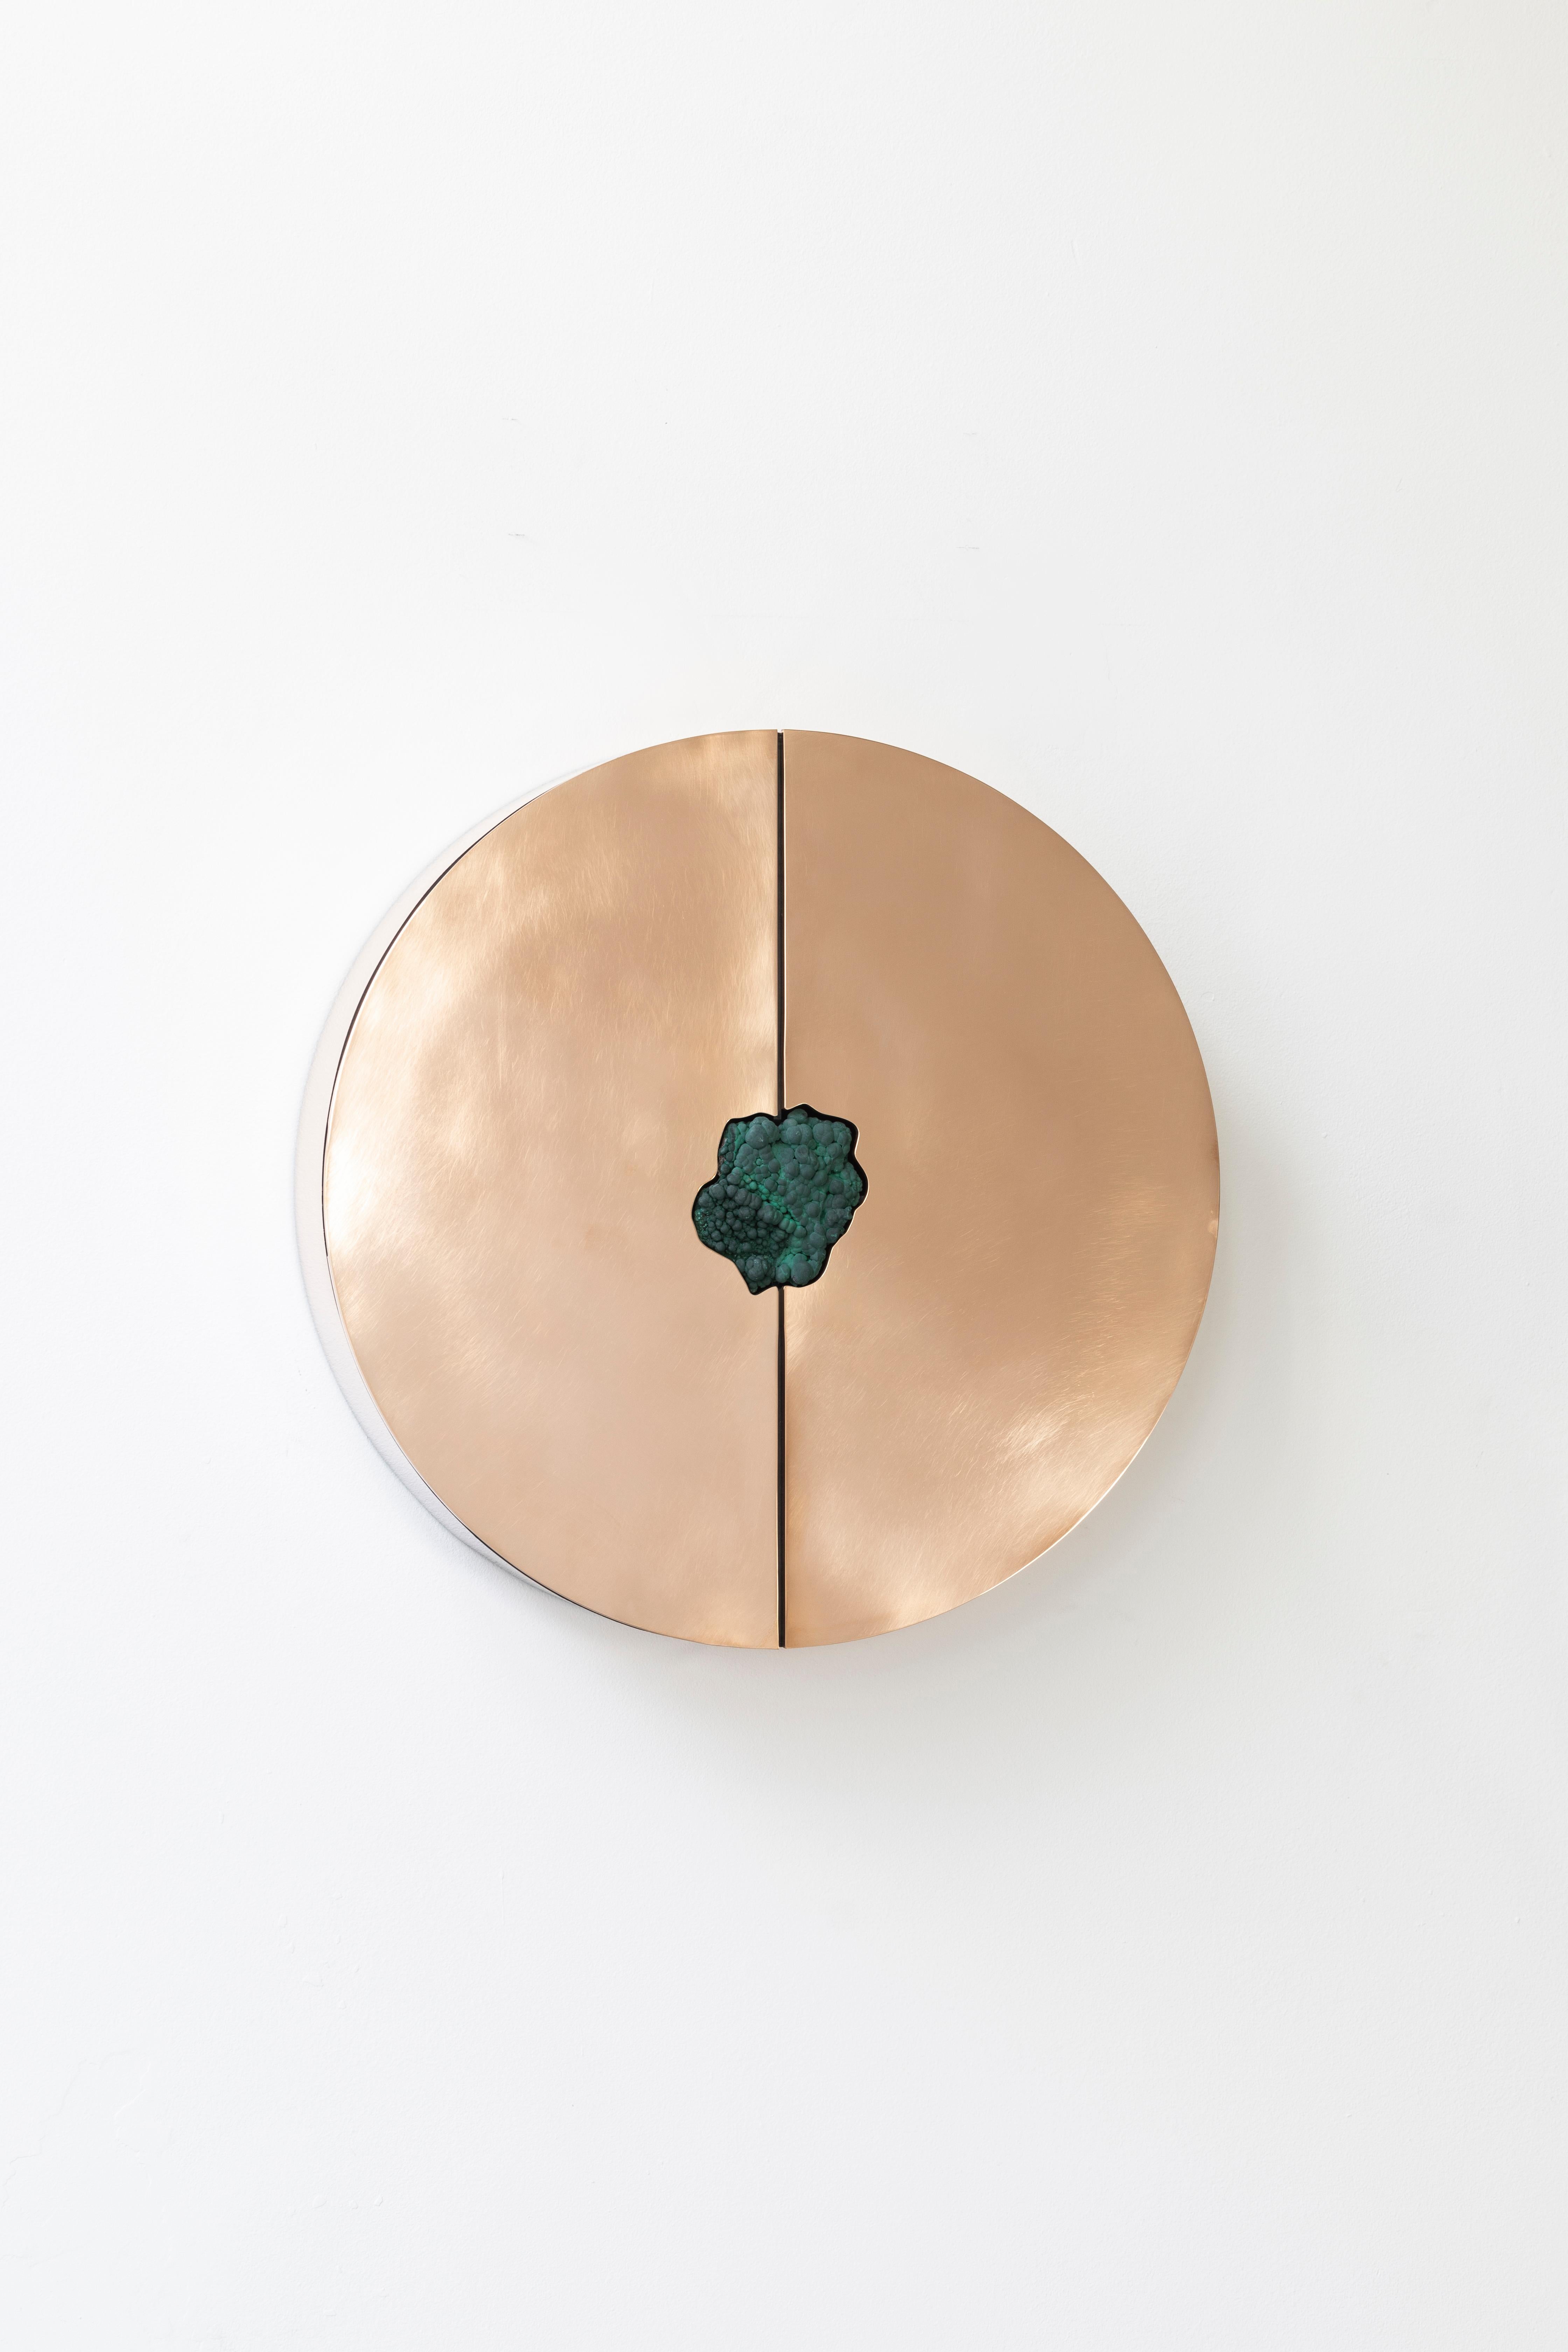 Wall cabinet with Malachite by Pierre De Valck.
Dimensions: W 90 x D 22 x H 90cm
Materials: Polished bronze with Malachite.
Weight: 45 kg.
Each piece is unique.

Pierre De Valck (1991) born in Brussels, is a Ghent-based designer with a